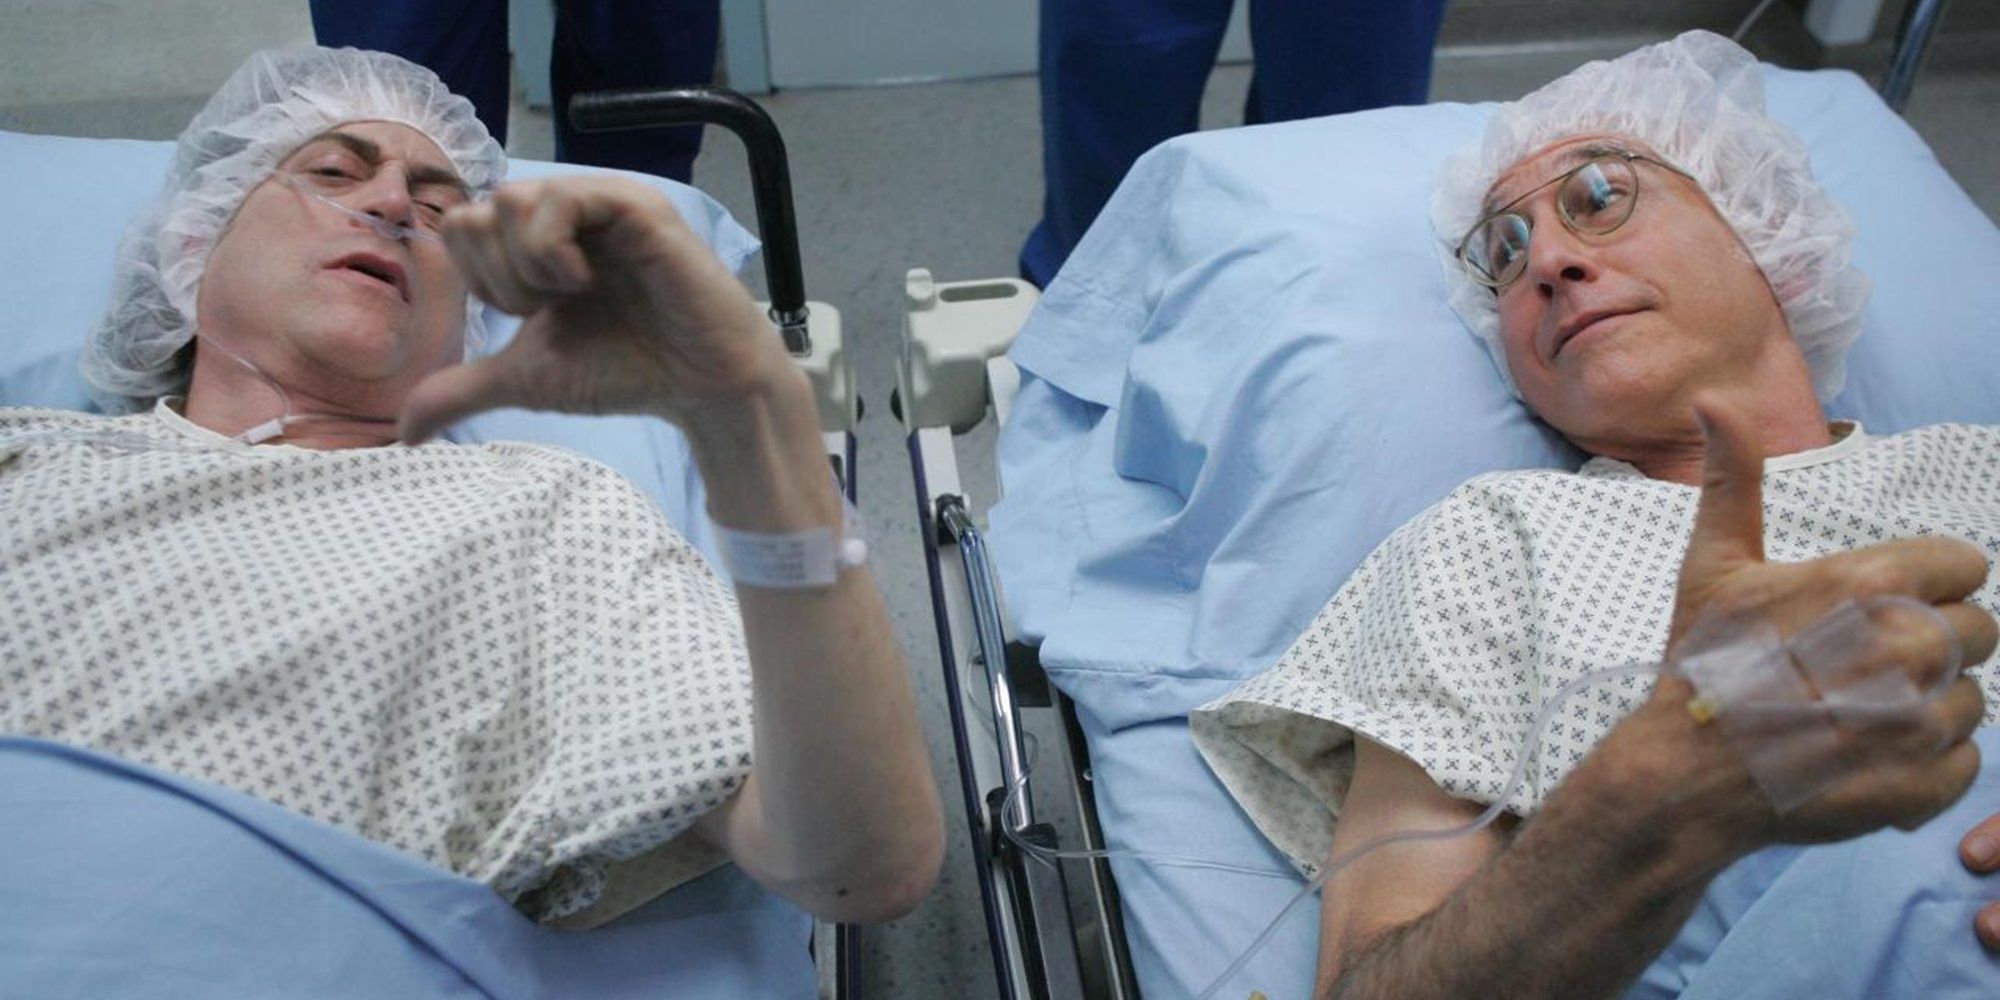 Larry and Richard go in for surgery in Curb Your Enthusiasm